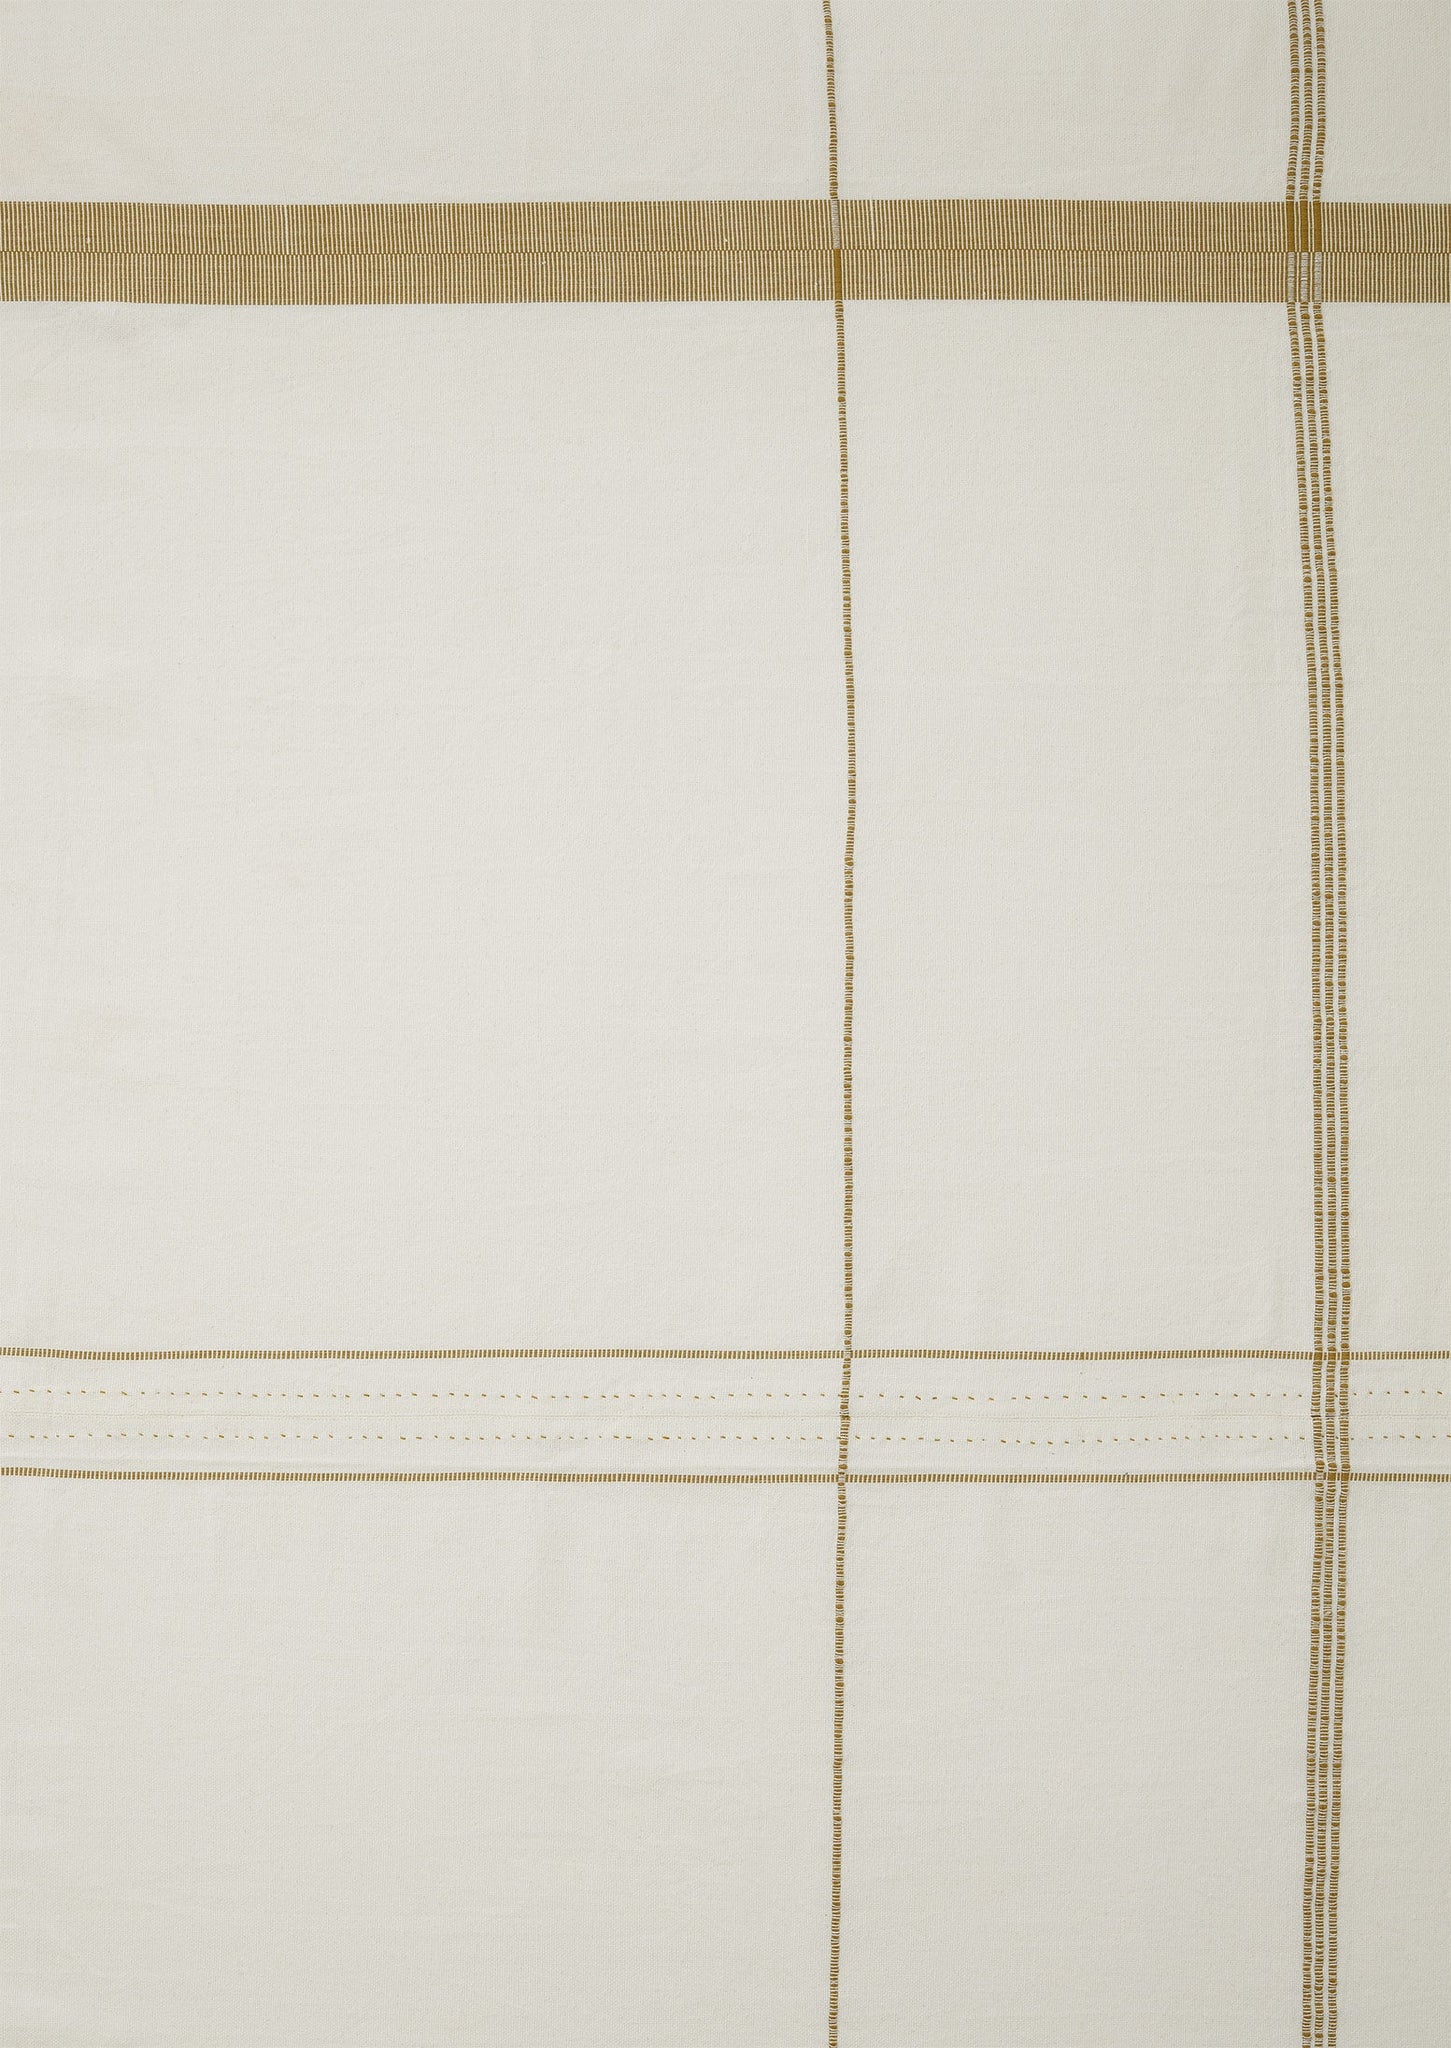 Hand Woven Cotton Tablecloth | Ecru/Olive